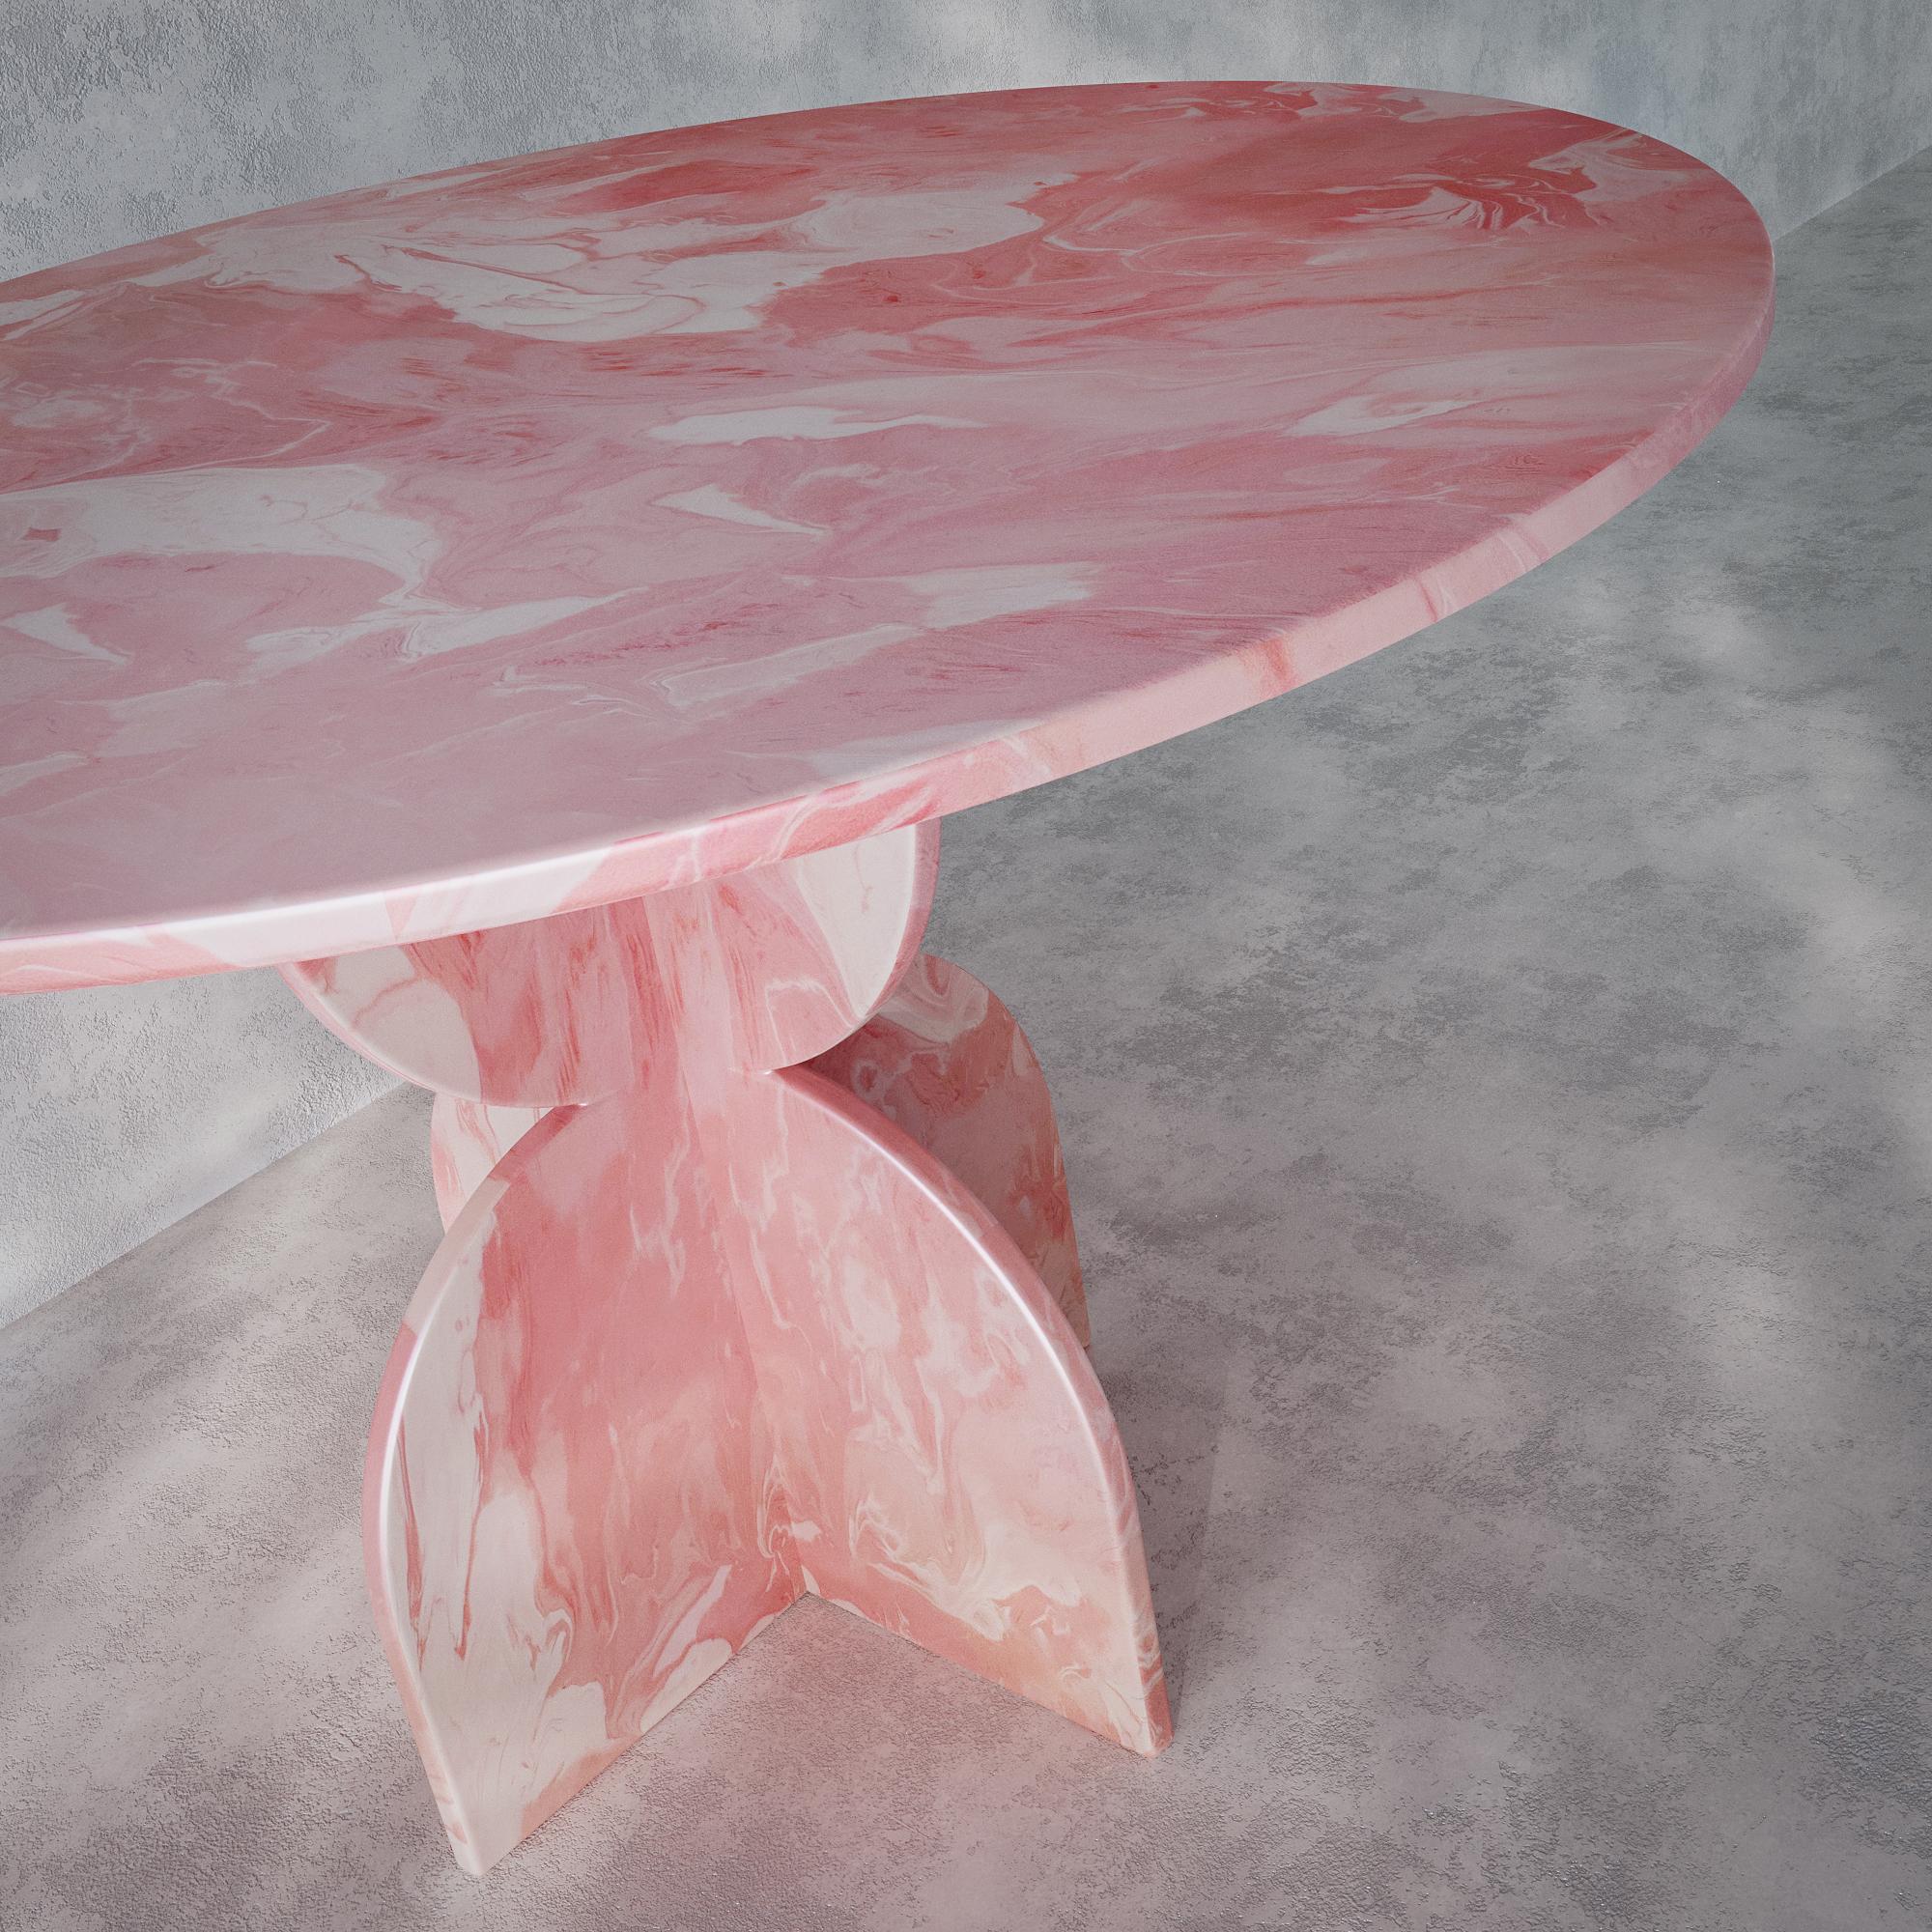 Dutch Contemporary Pink Round Table Hand-Crafted 100% Recycled Plastic by Anqa Studios For Sale